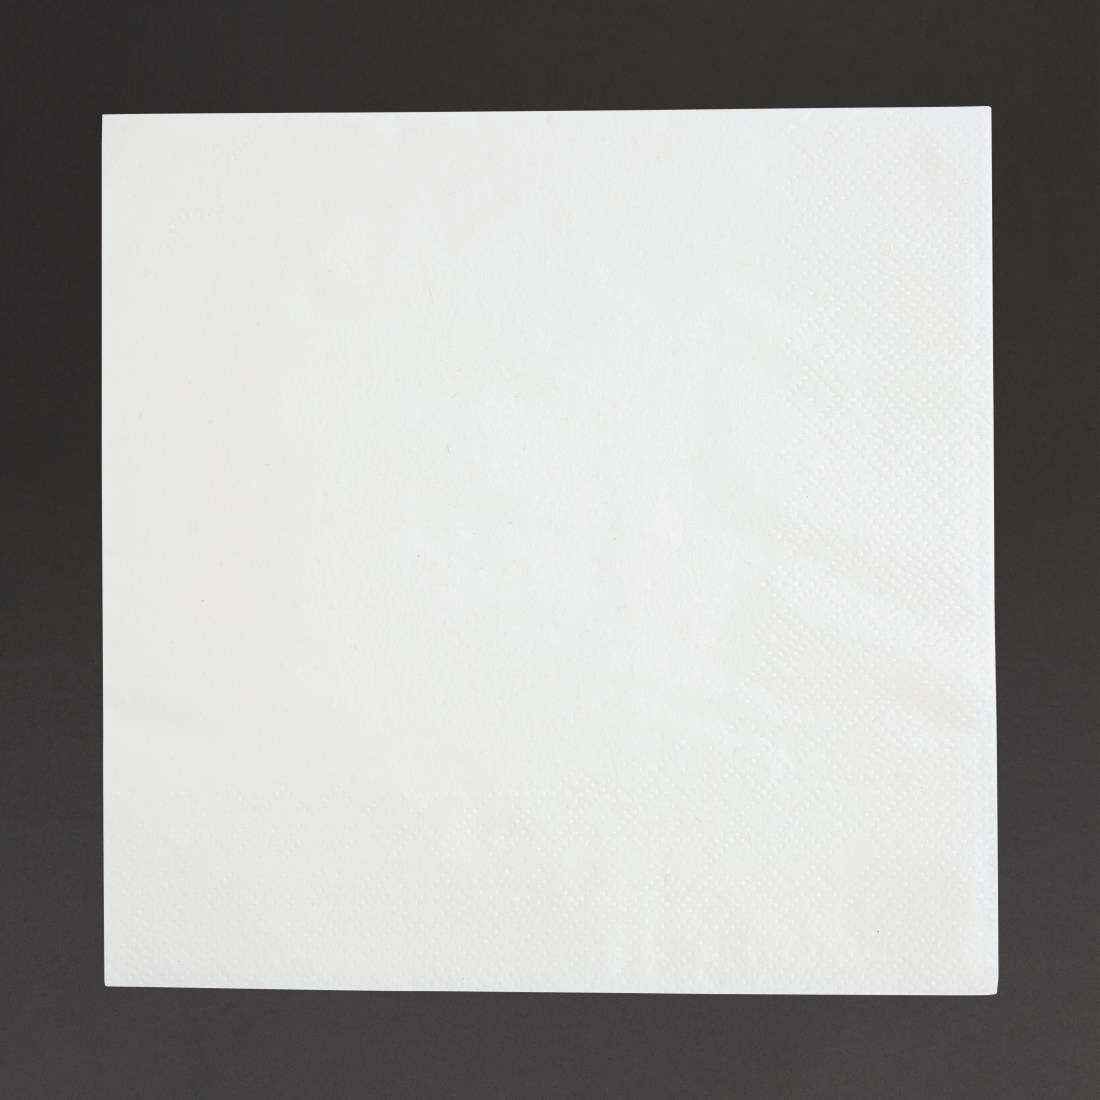 Fiesta Recyclable Lunch Napkin White 30x30cm 1ply 1/4 Fold (Pack of 5000) - FE212  - 1